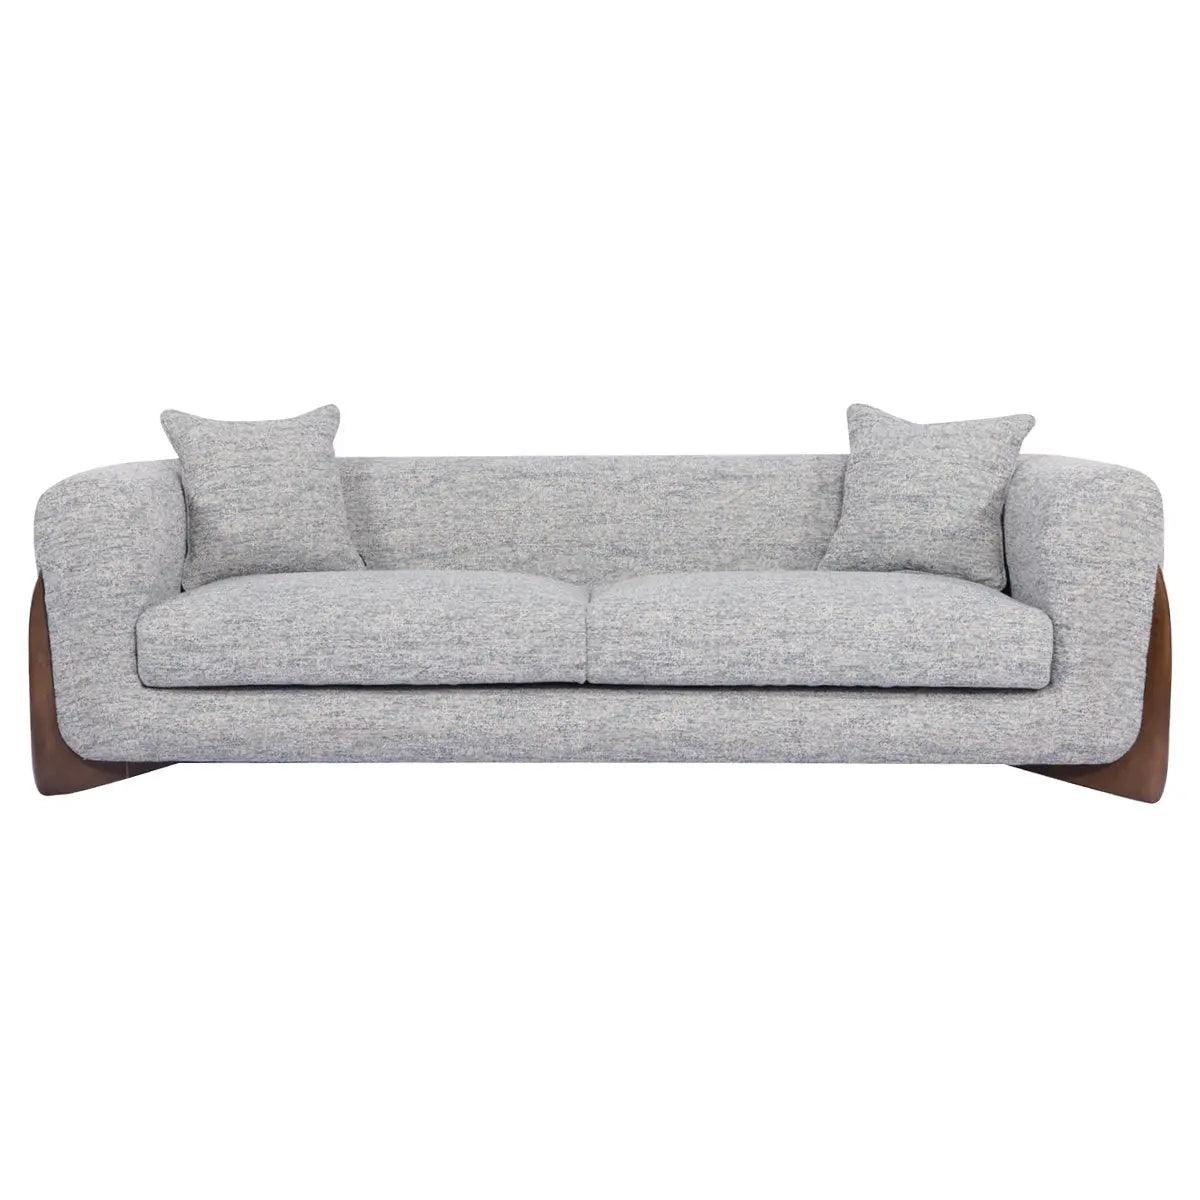 Penthouse 3 Seater Sofa - Ice The Family Love Tree